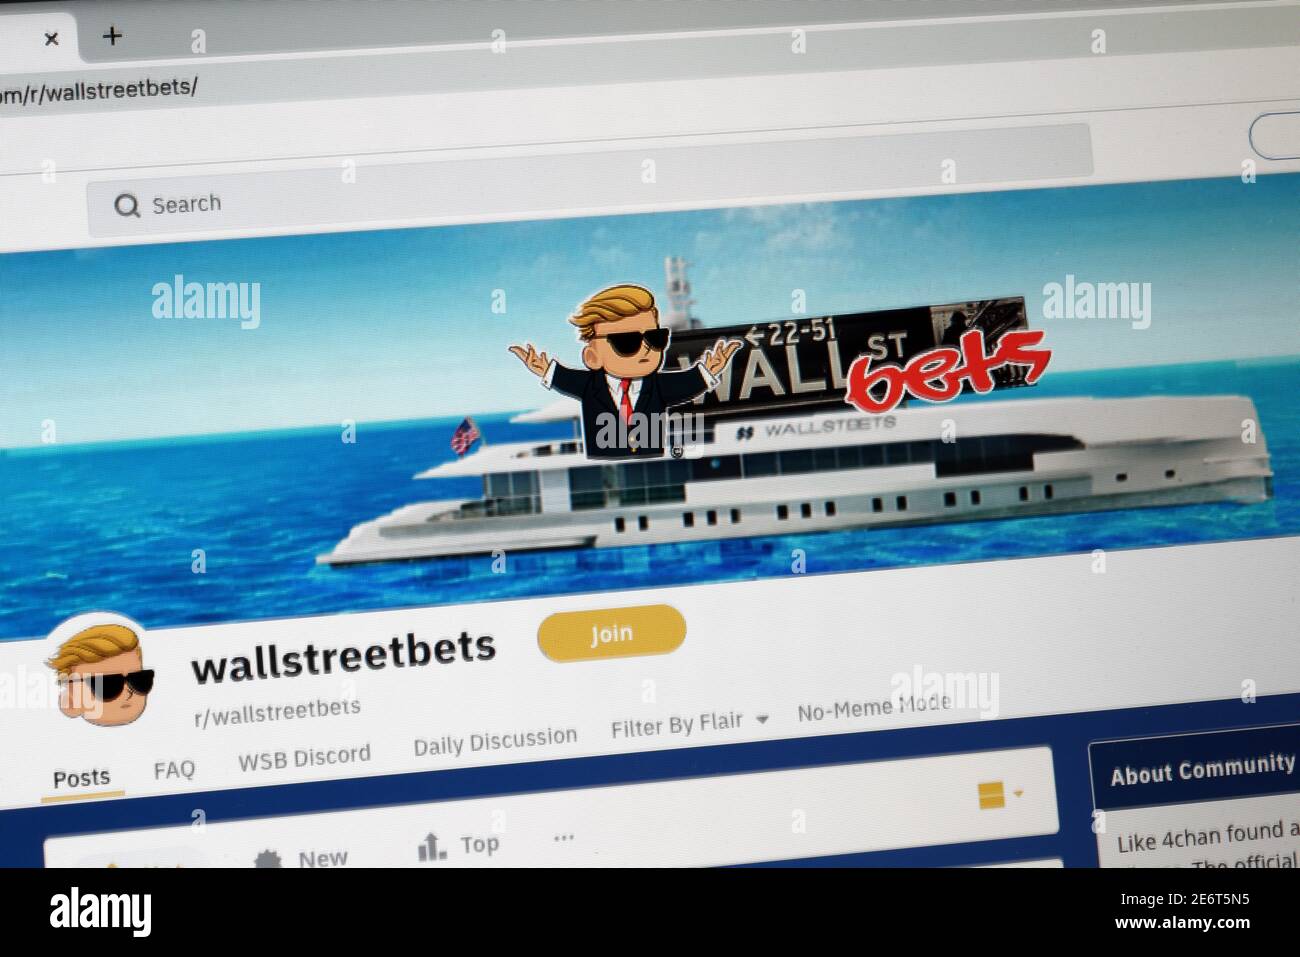 Mainz, Germany - January 29, 2021: A close up on a computer screen shows the frontpage and icon of the Wallstreetbets group, on the Reddit internet site. Stock Photo